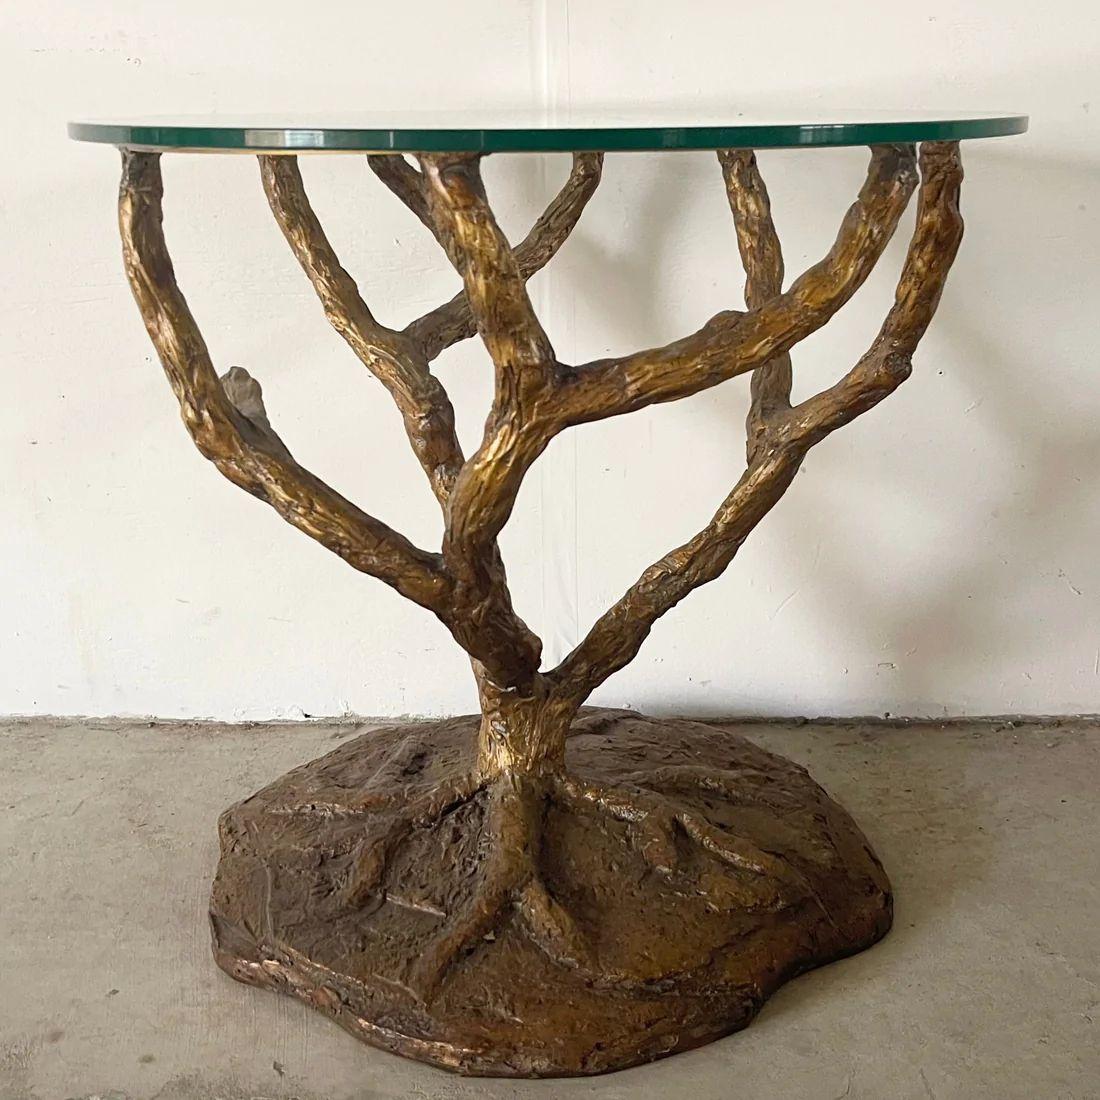 This impressive sculptural tree side table boasts a decorative bronze style composite design and a circular glass top to match. Unique accent table for use as a sofa side table or lamp table- exquisite design makes a memorable addition to any